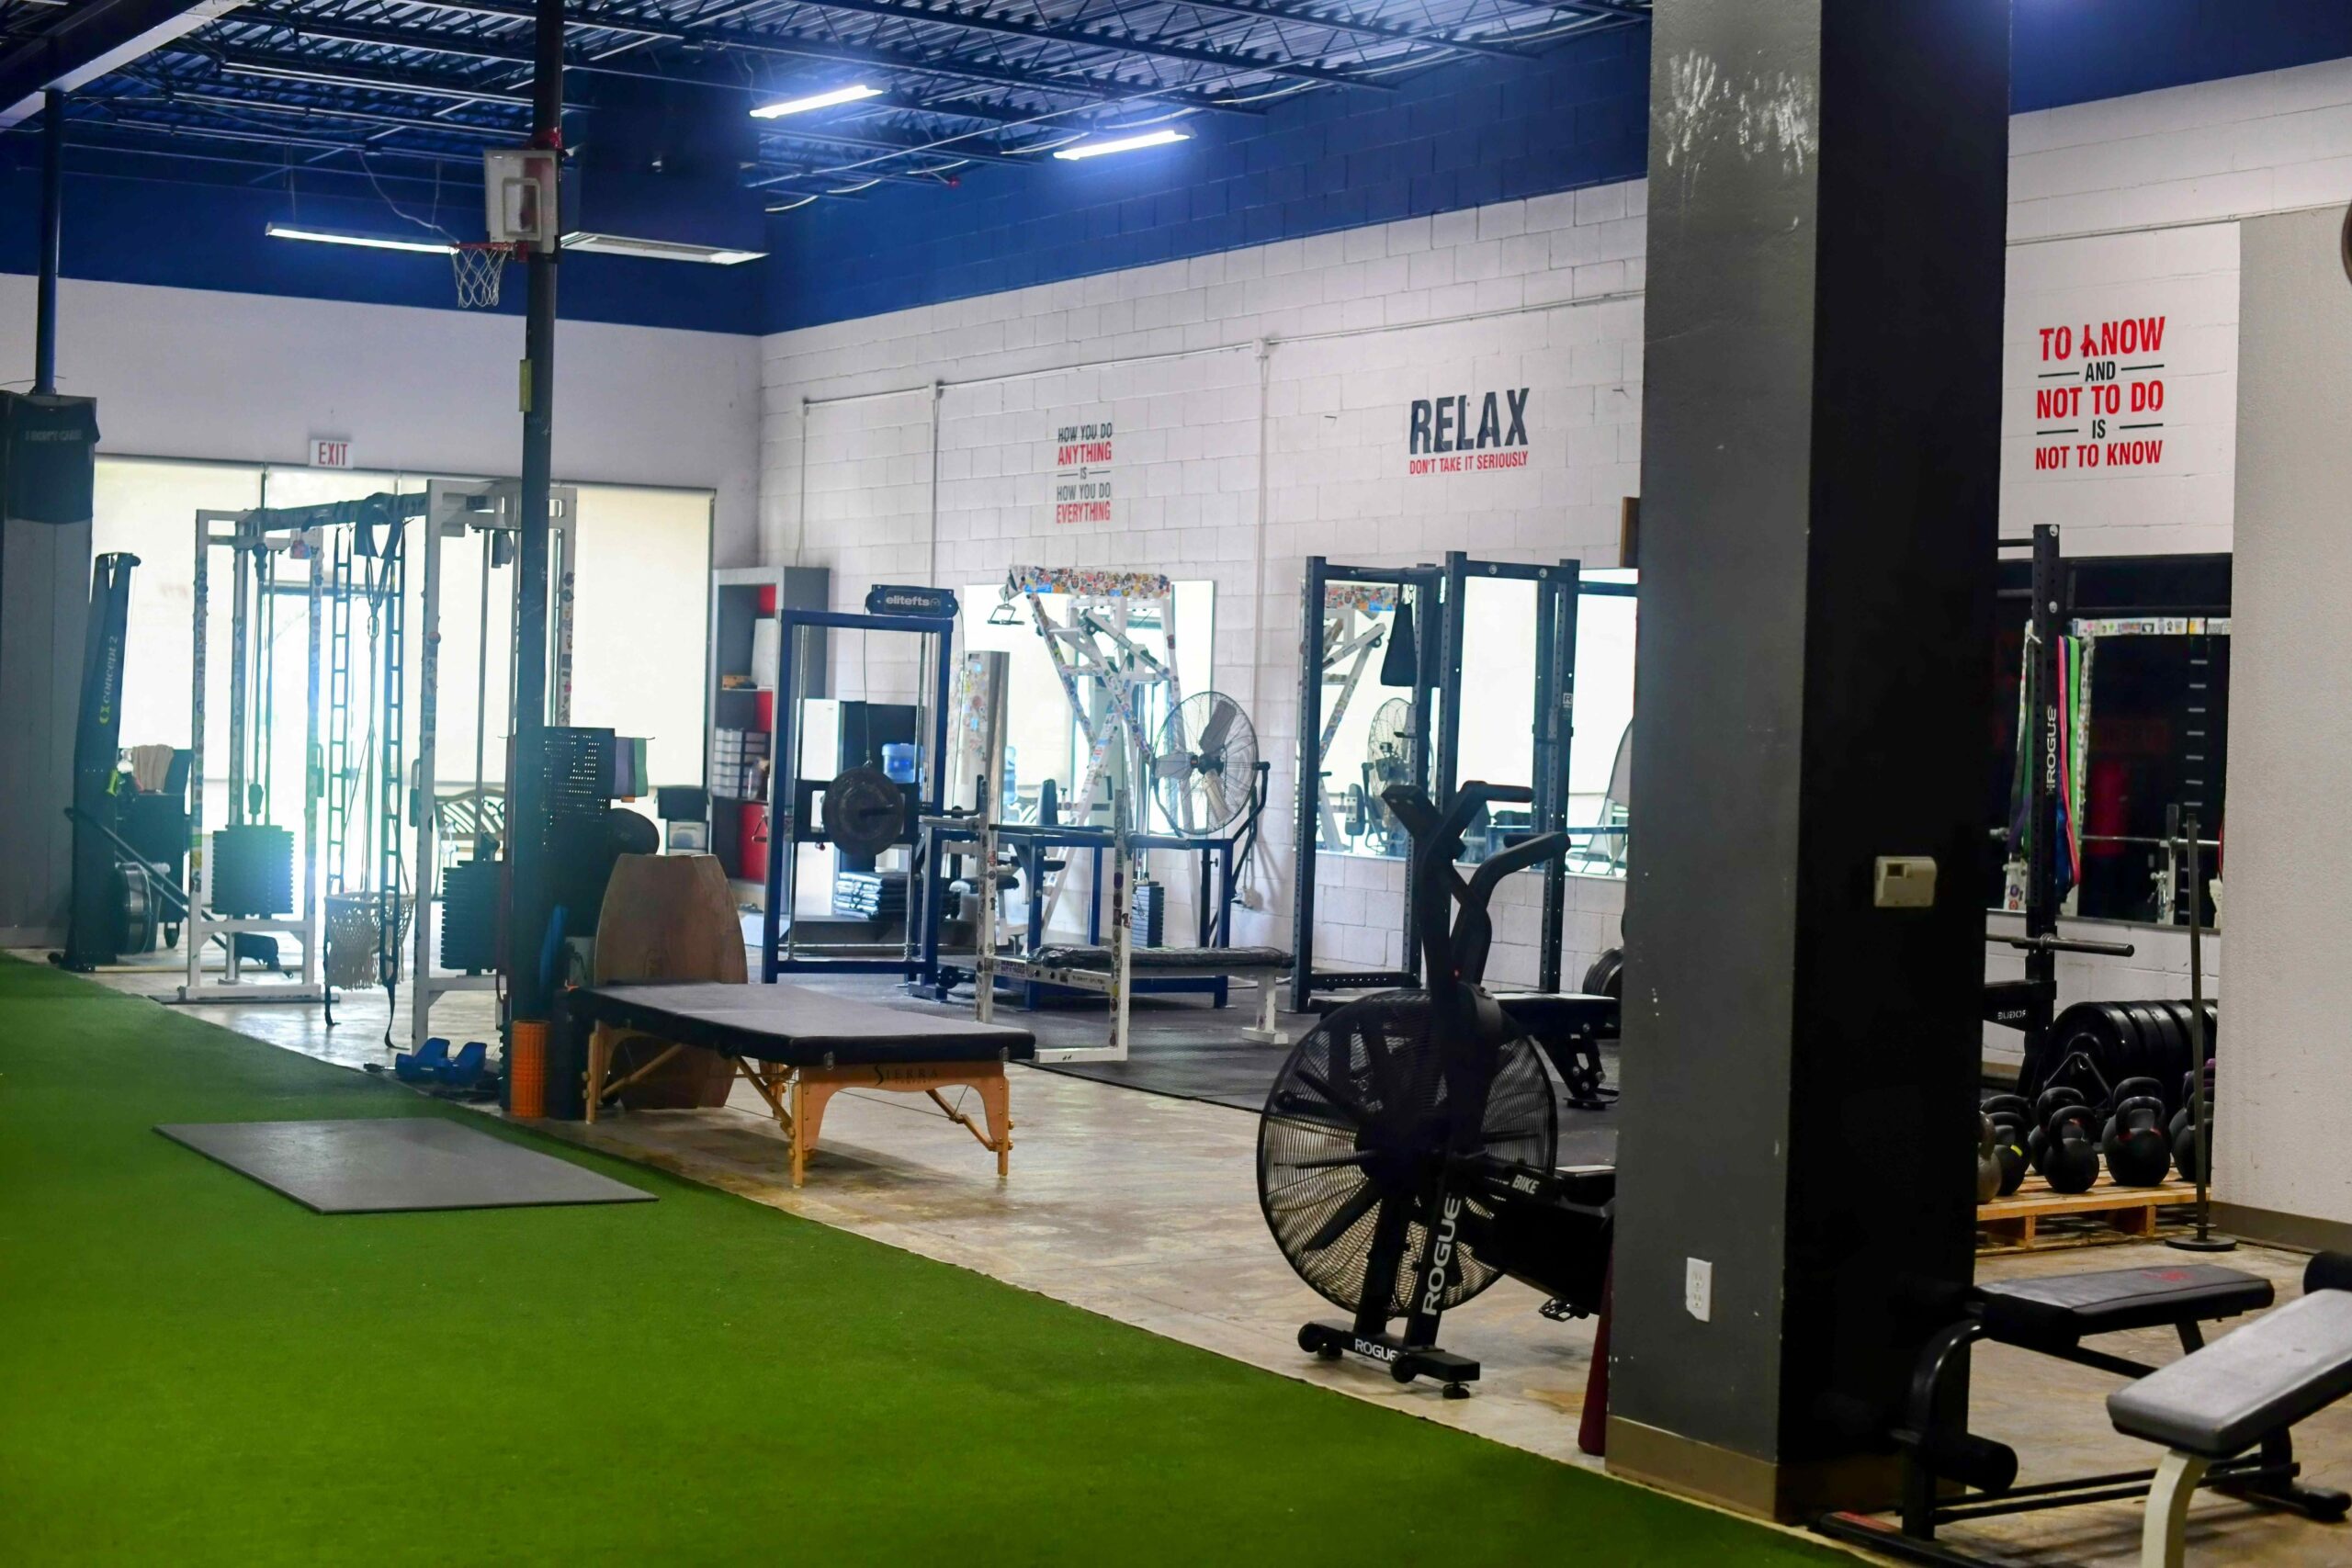 A spacious and clean workout area showcasing state-of-the-art fitness equipment and facilities